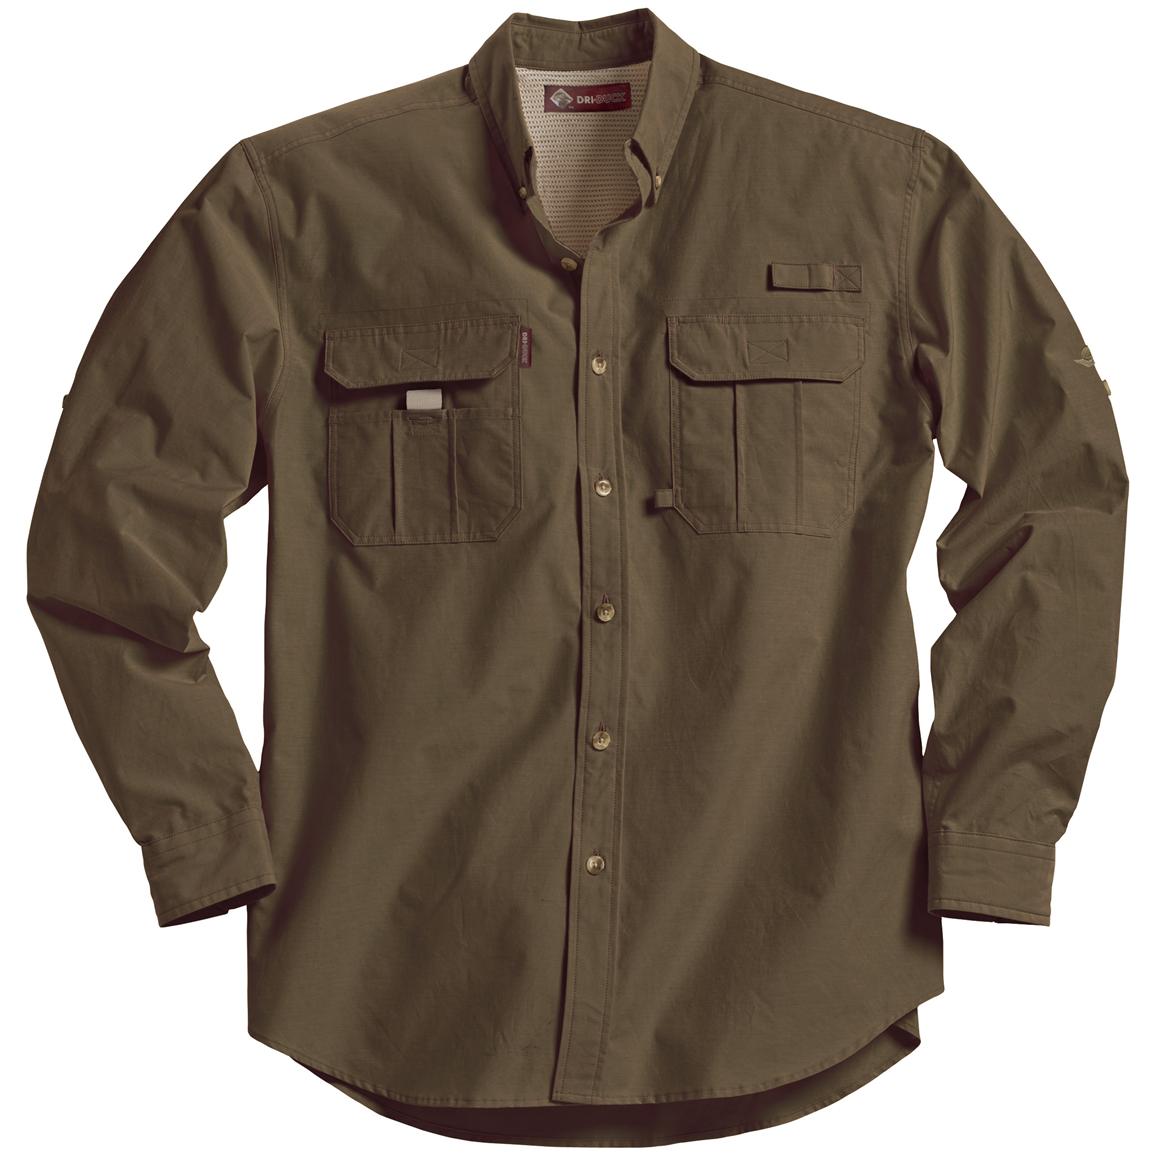 Men's DRI DUCK Outfitter Button-down - 172109, Shirts at Sportsman's Guide